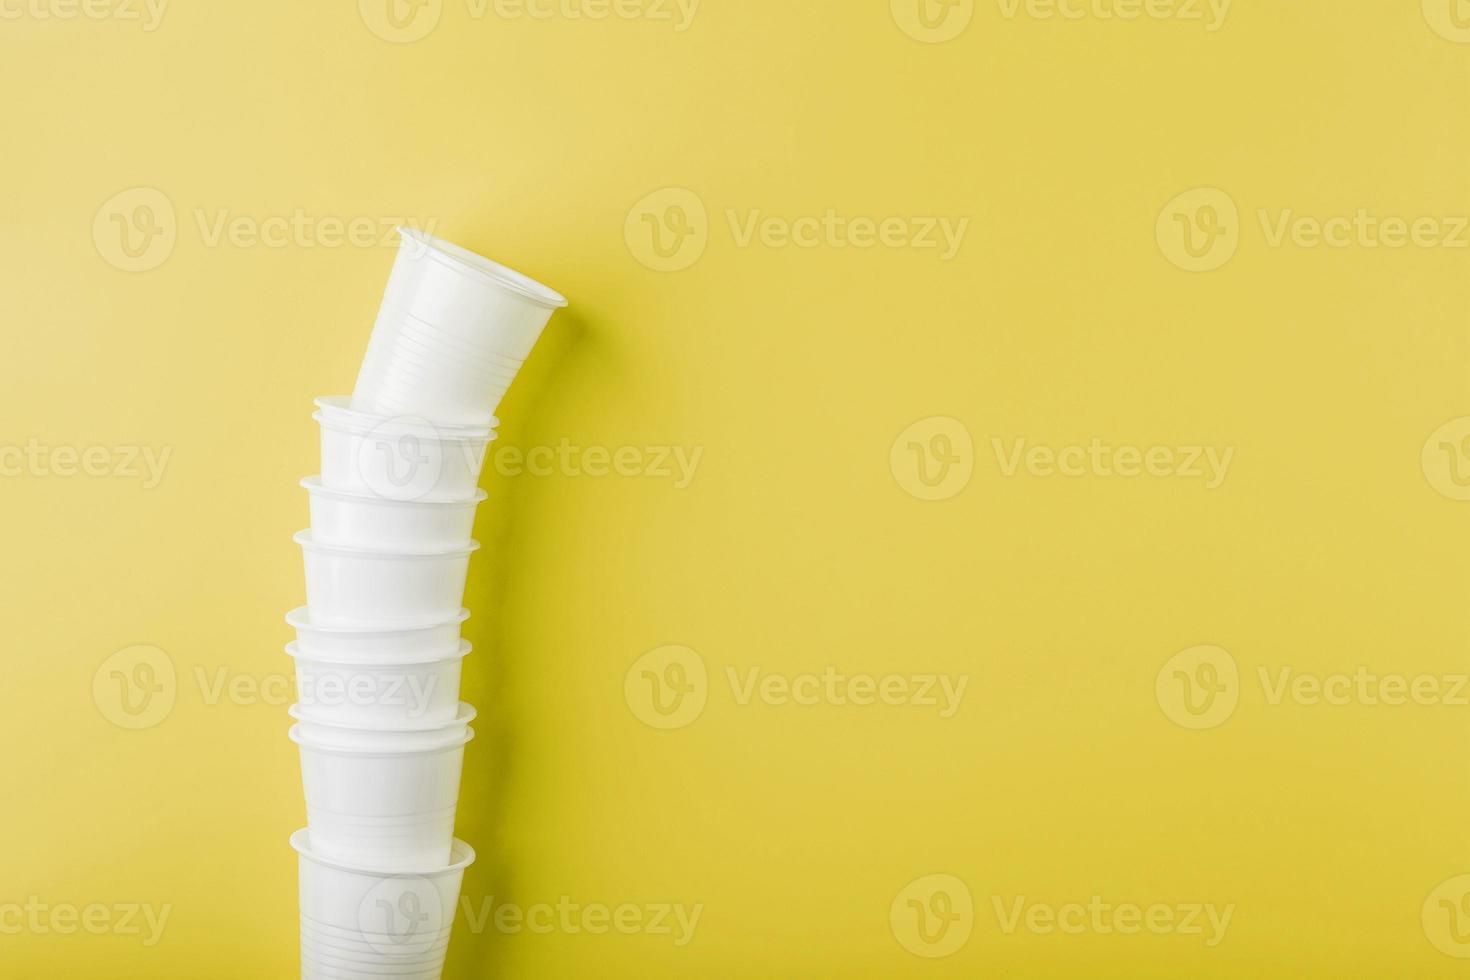 Plastic tableware on a yellow background with free space. photo